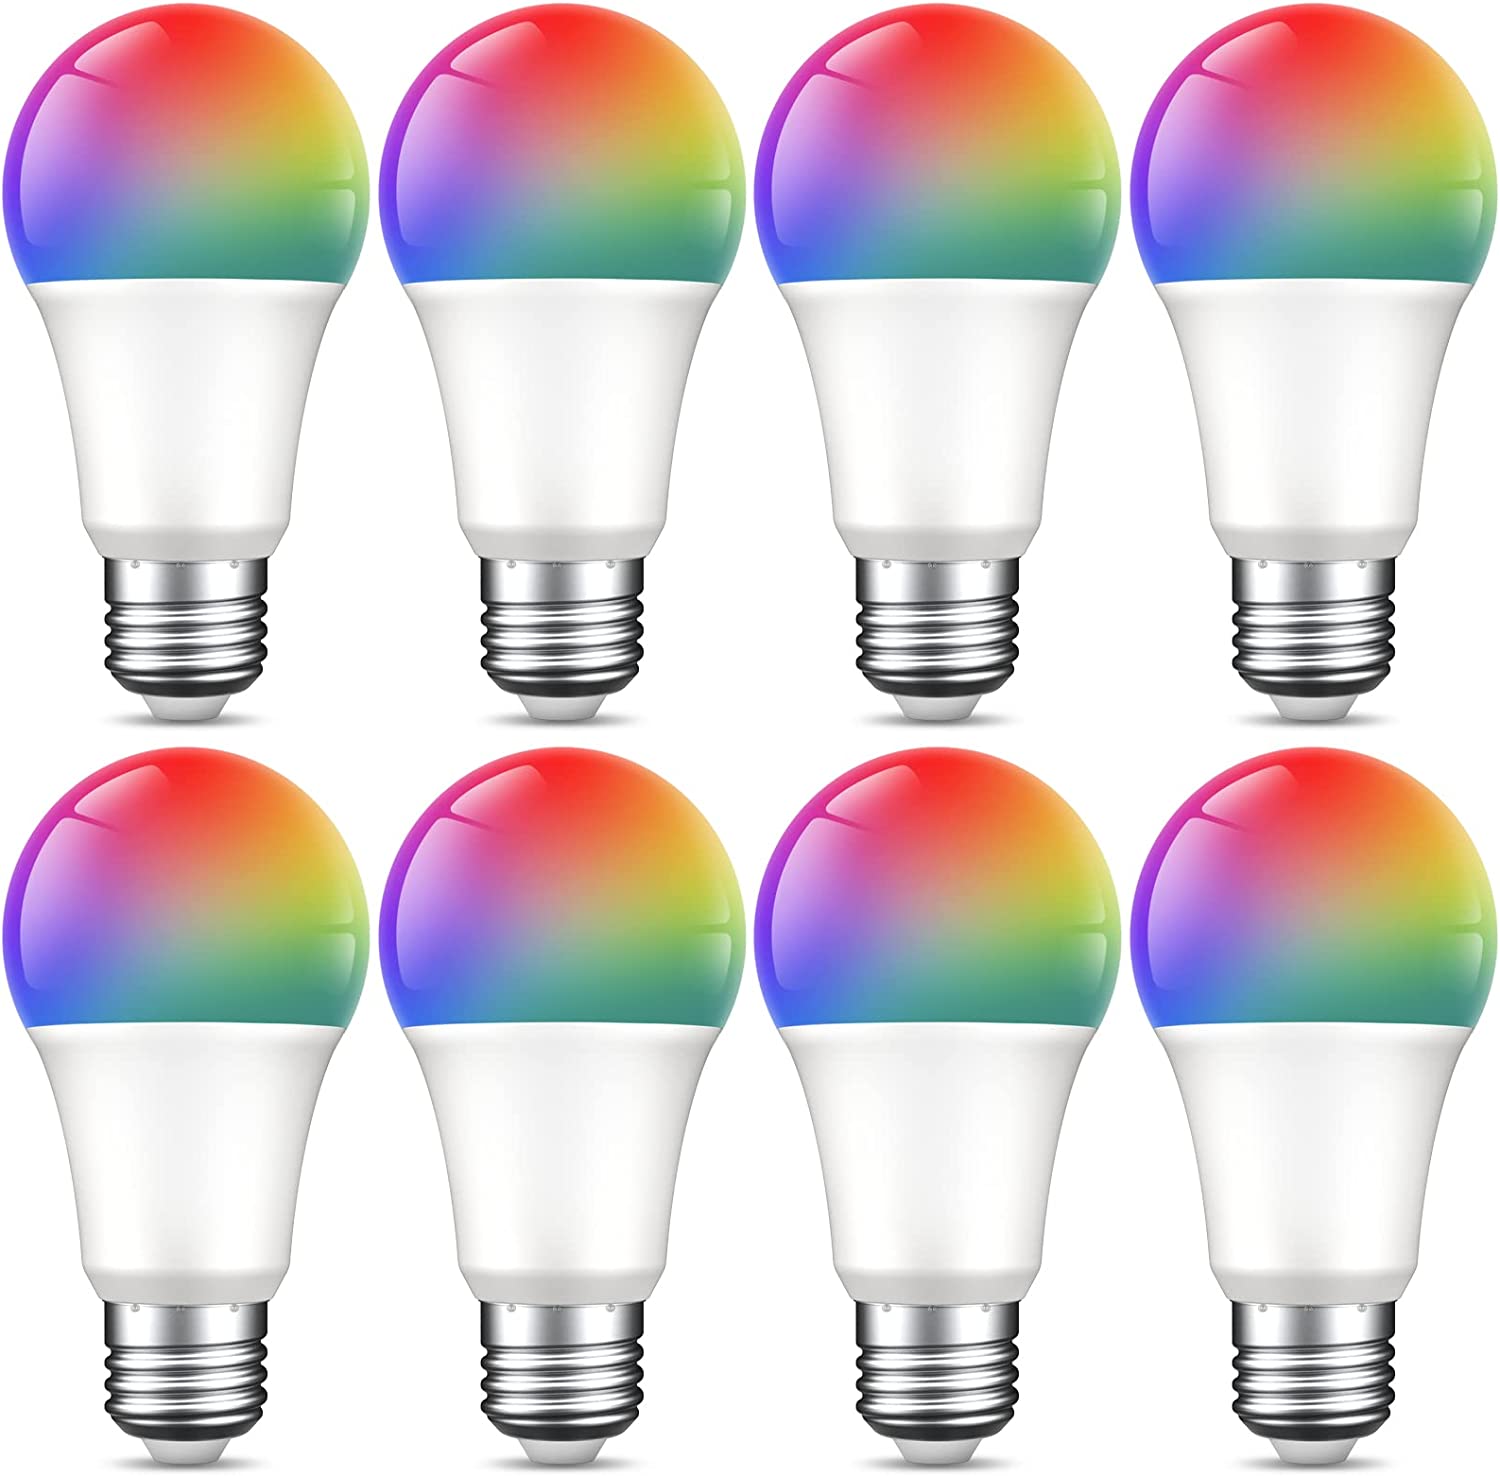 Ghome Smart Light Bulbs, A19 E26 Color Changing Led Bulb Works with Alexa, Google Home, App & Voice Control, 2.4Ghz WiFi Only, 800 Lumens,Dimmable RGB Warm White 2700K Smart Home Lighting Bulb, 8 Pack